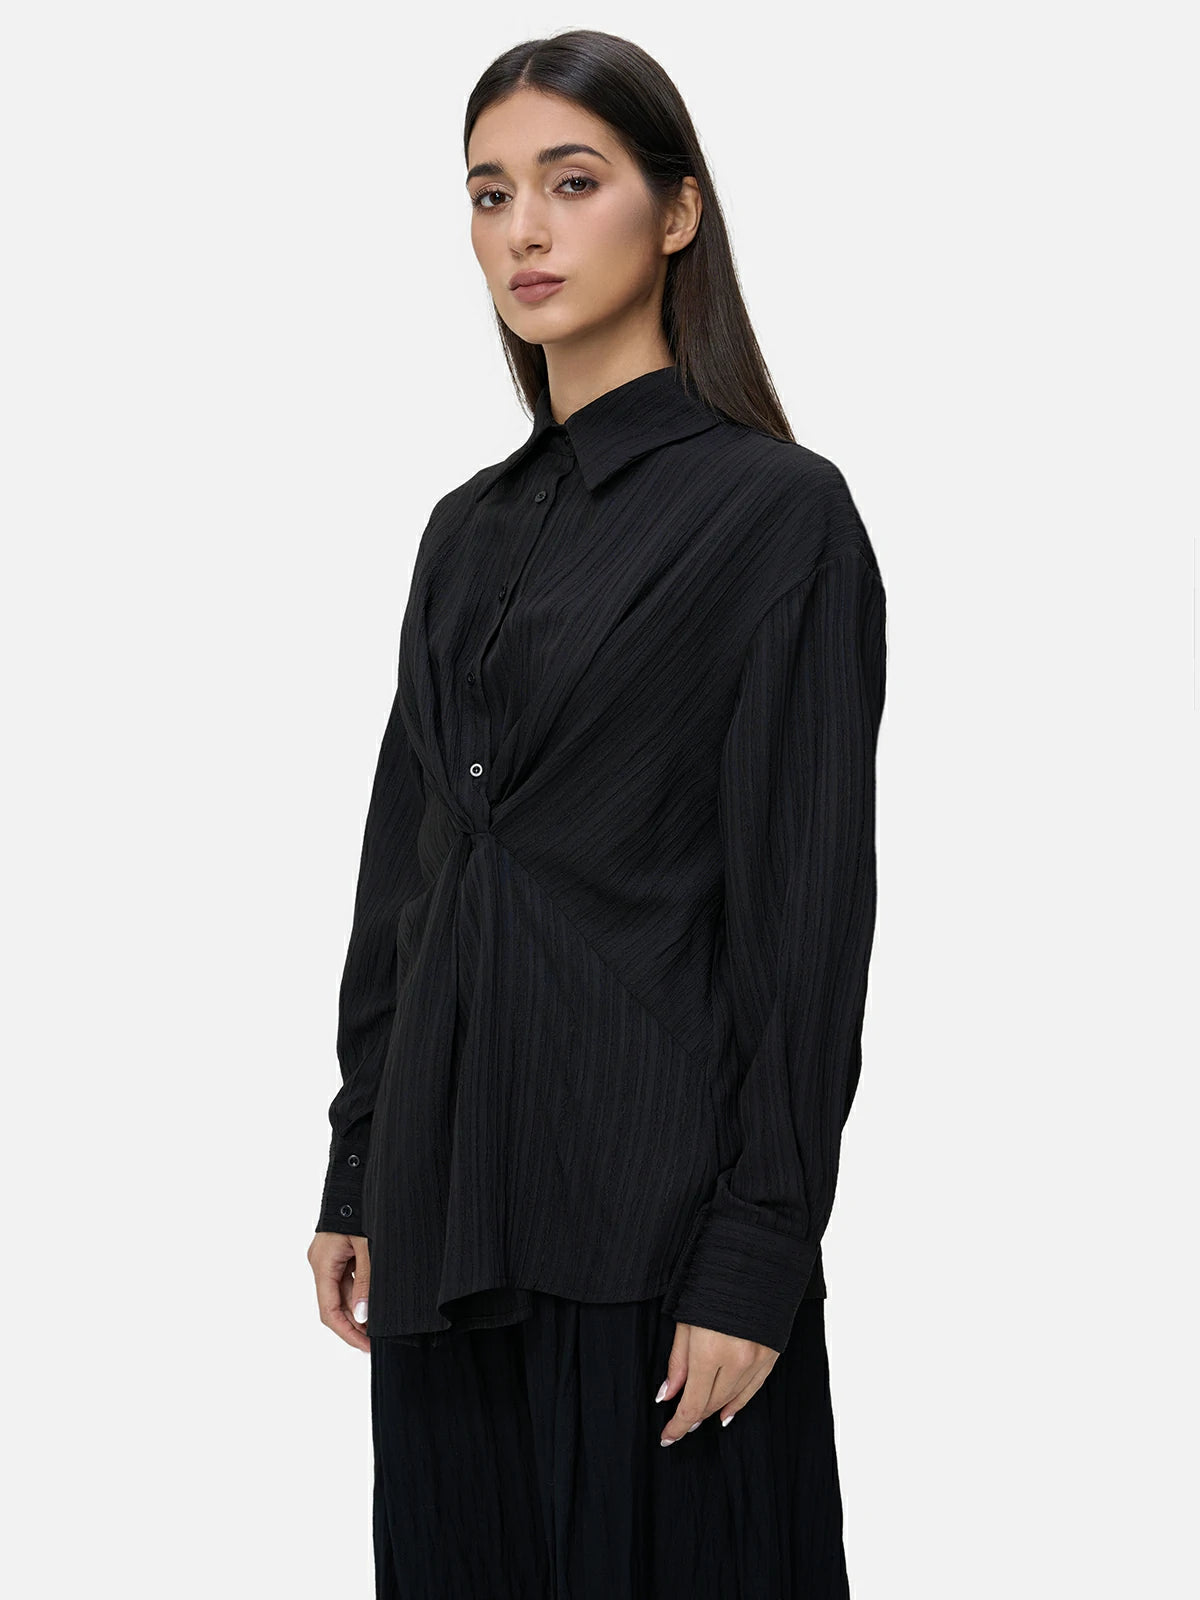 Fashion-forward feel with a front knot design on this black shirt